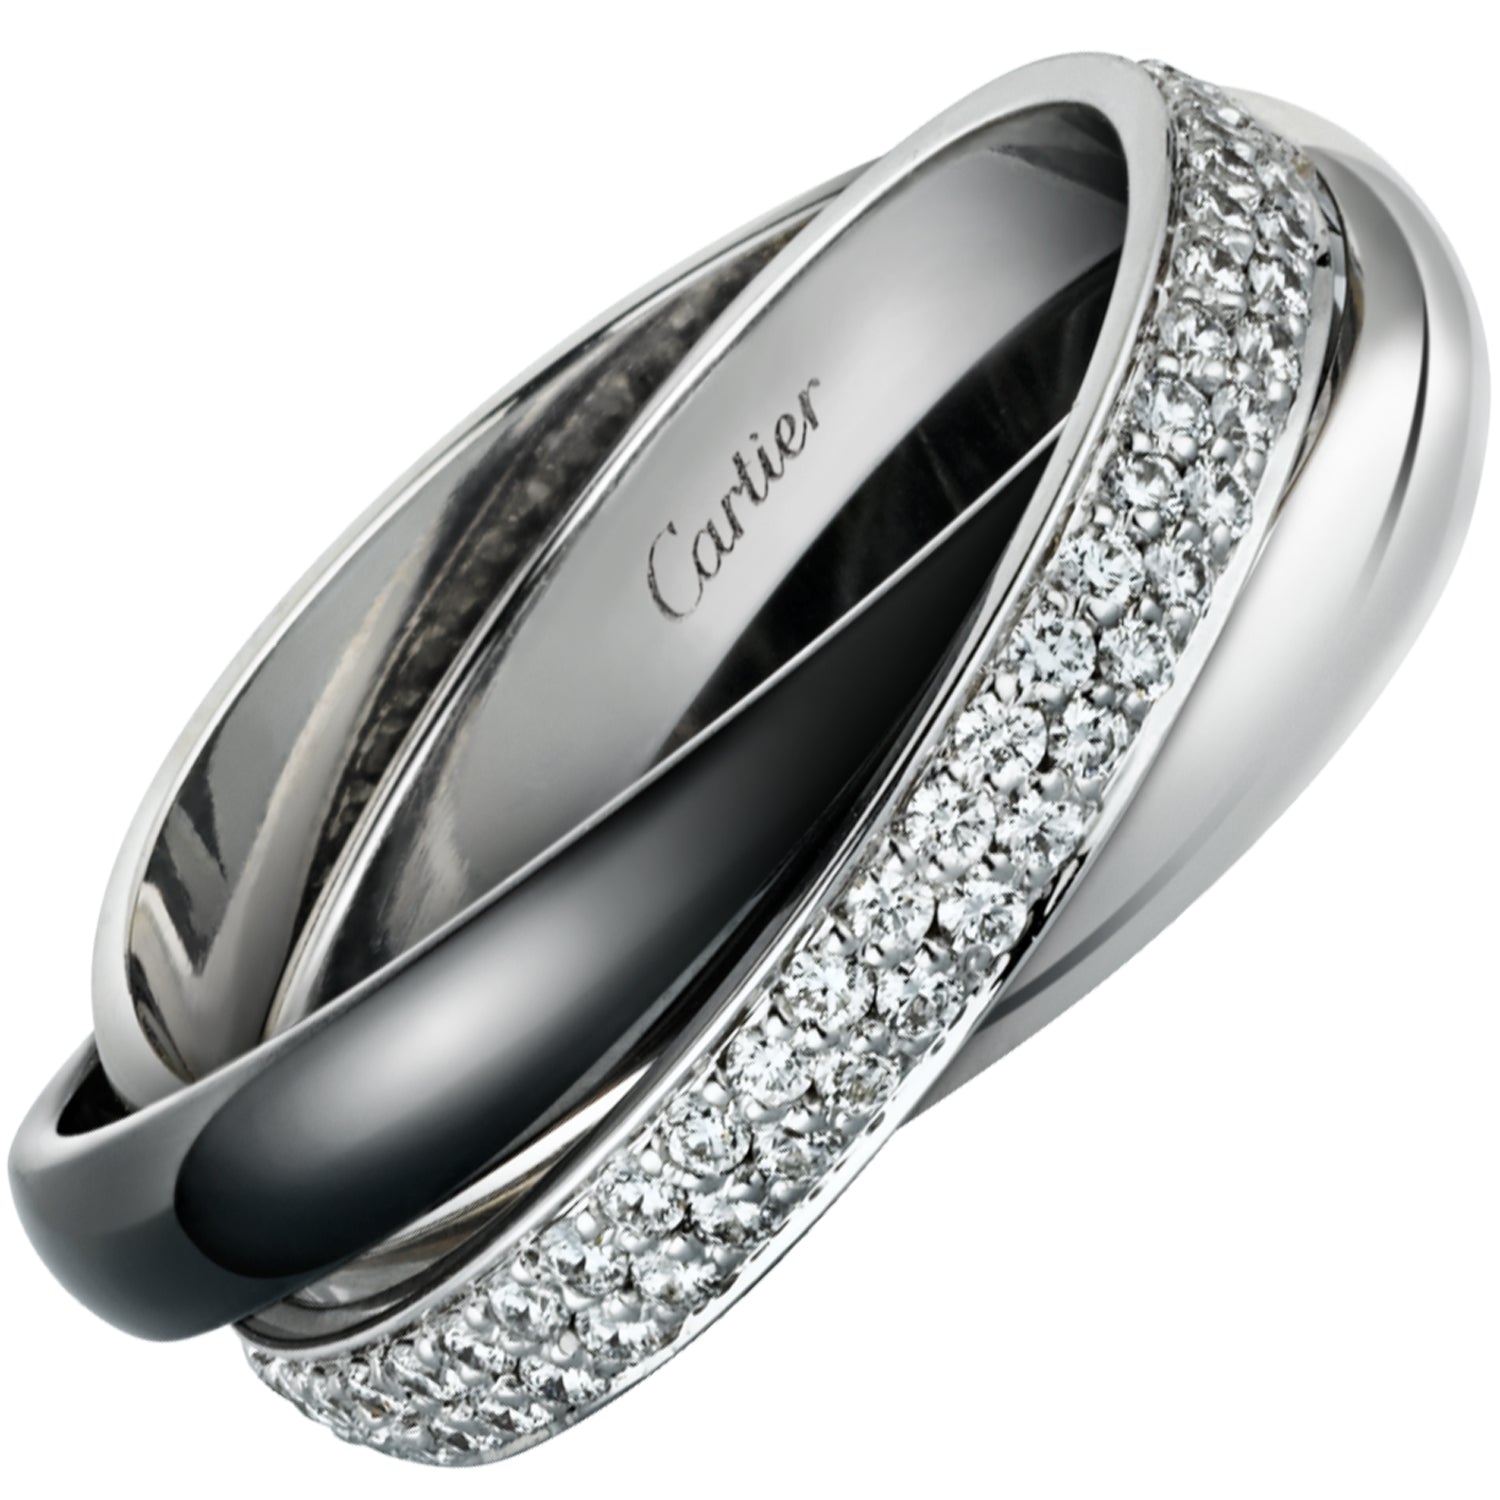 SASOM | accessories Cartier Love Wedding Band Diamond-Paved In 18K White  Gold With Brilliant-cut Diamond Check the latest price now!